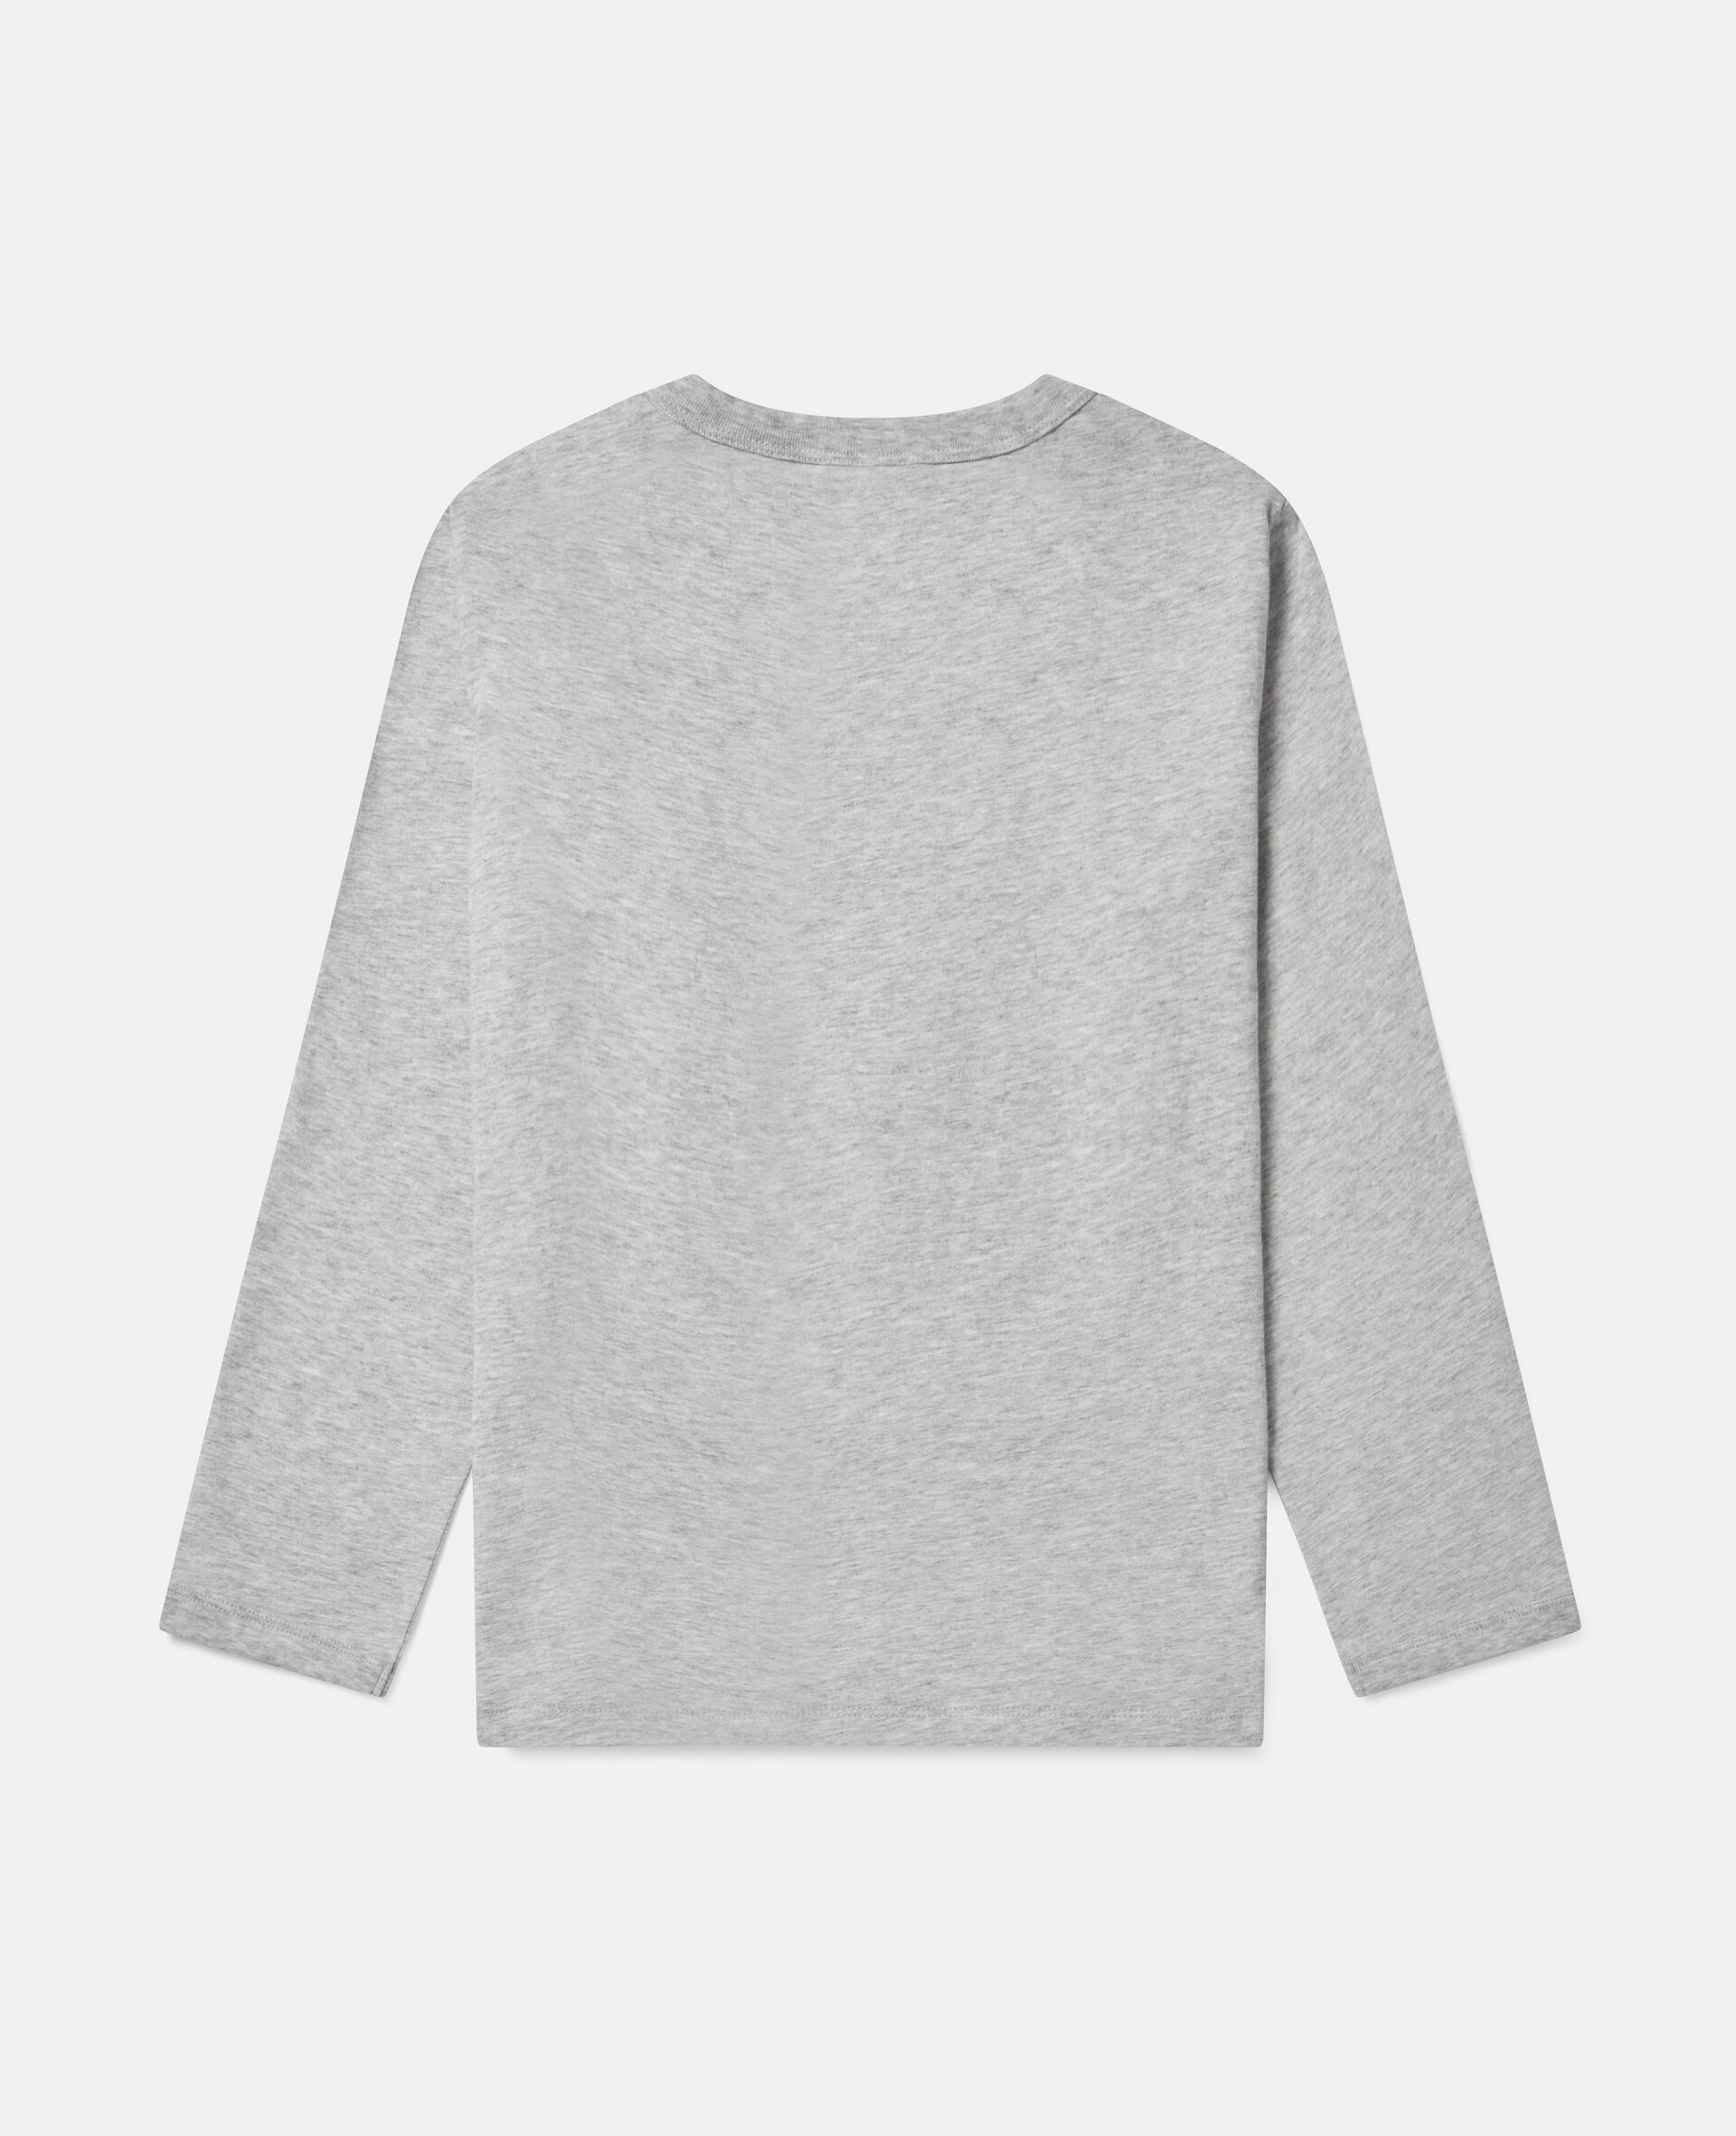 Oversized 'Stay Wild' Top-Grey-large image number 3